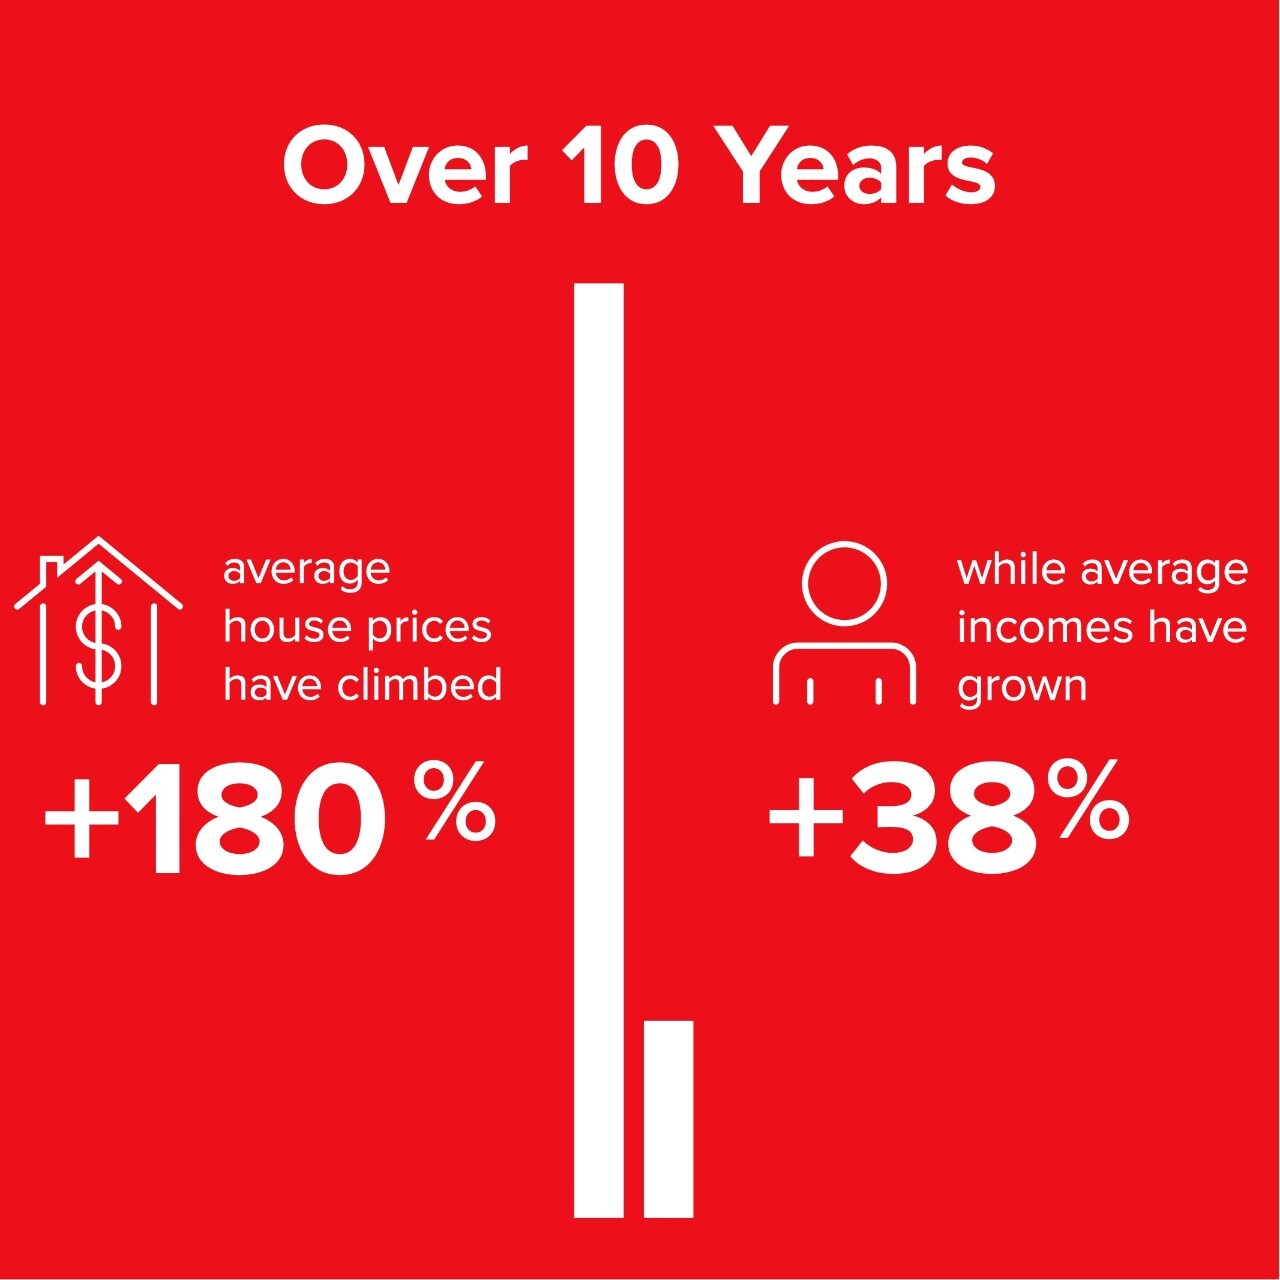 Over 10 years average house prices have climbed +180% while average incomes have grown +38%.